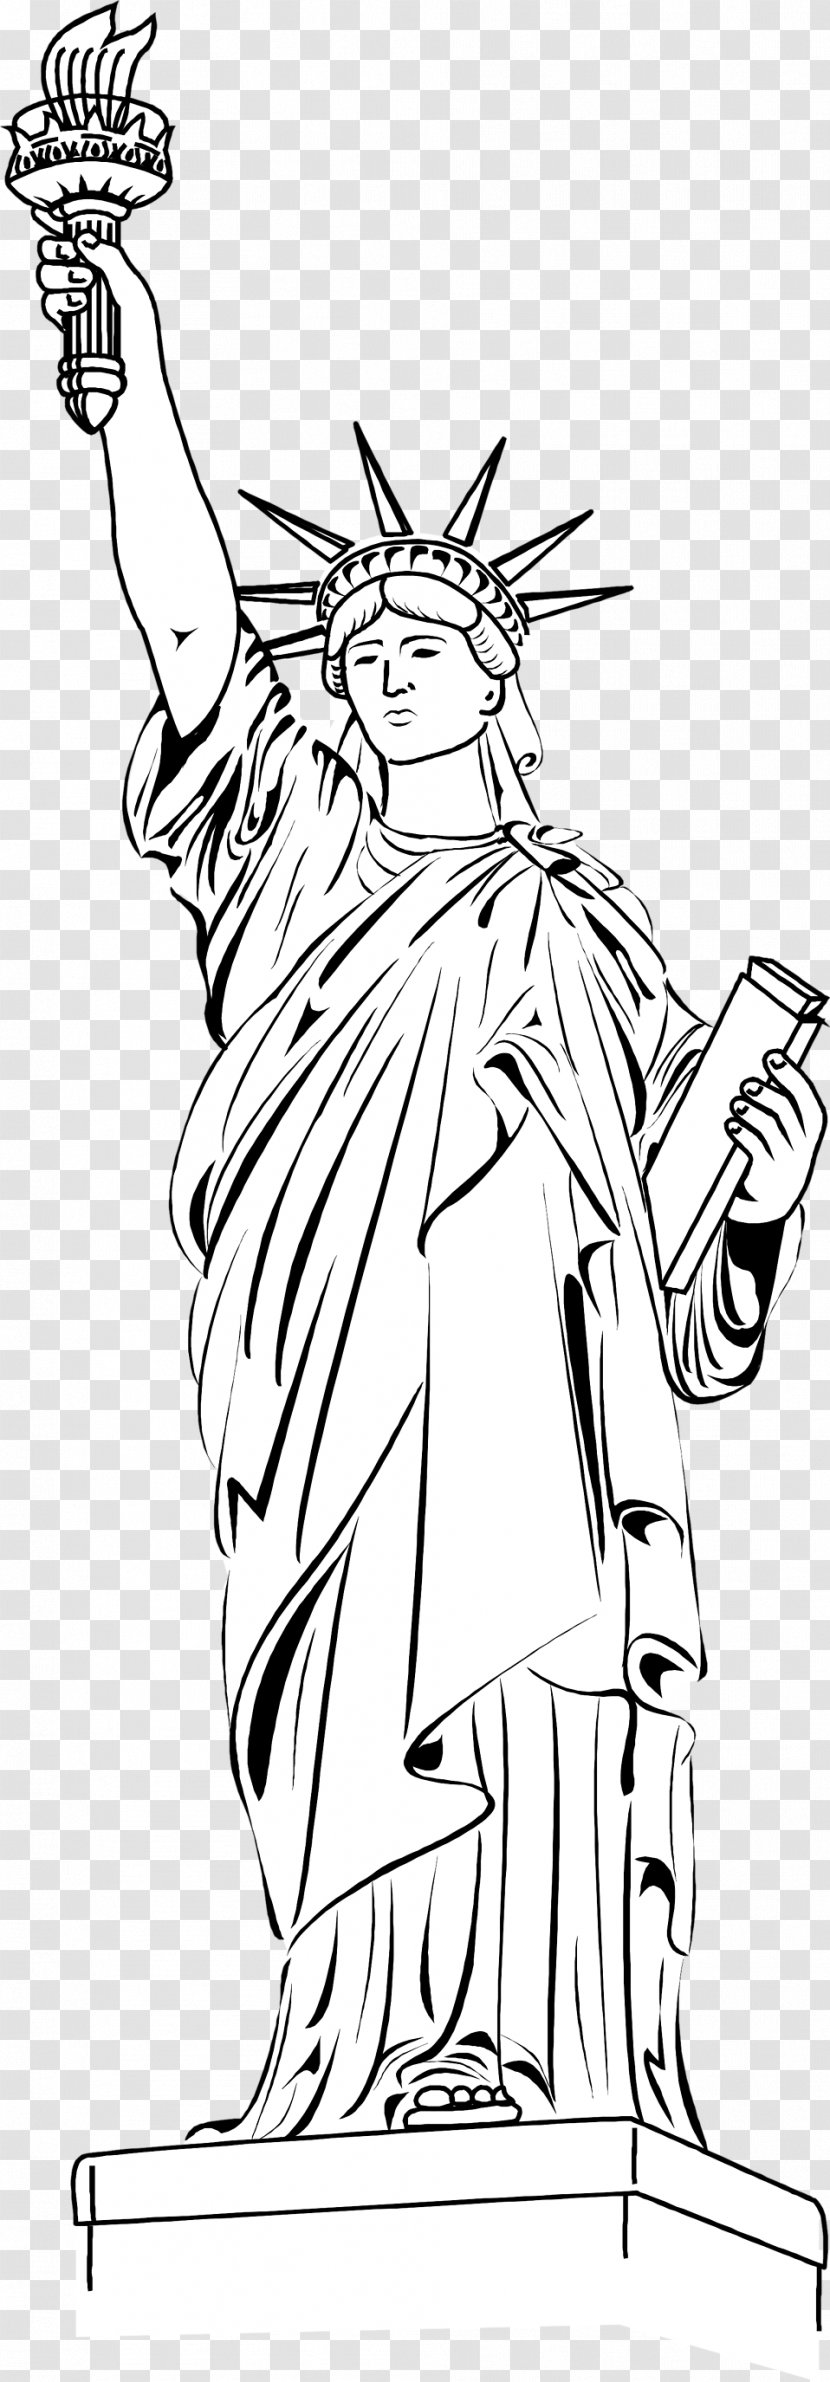 Statue Of Liberty Art Black And White Clip Transparent PNG